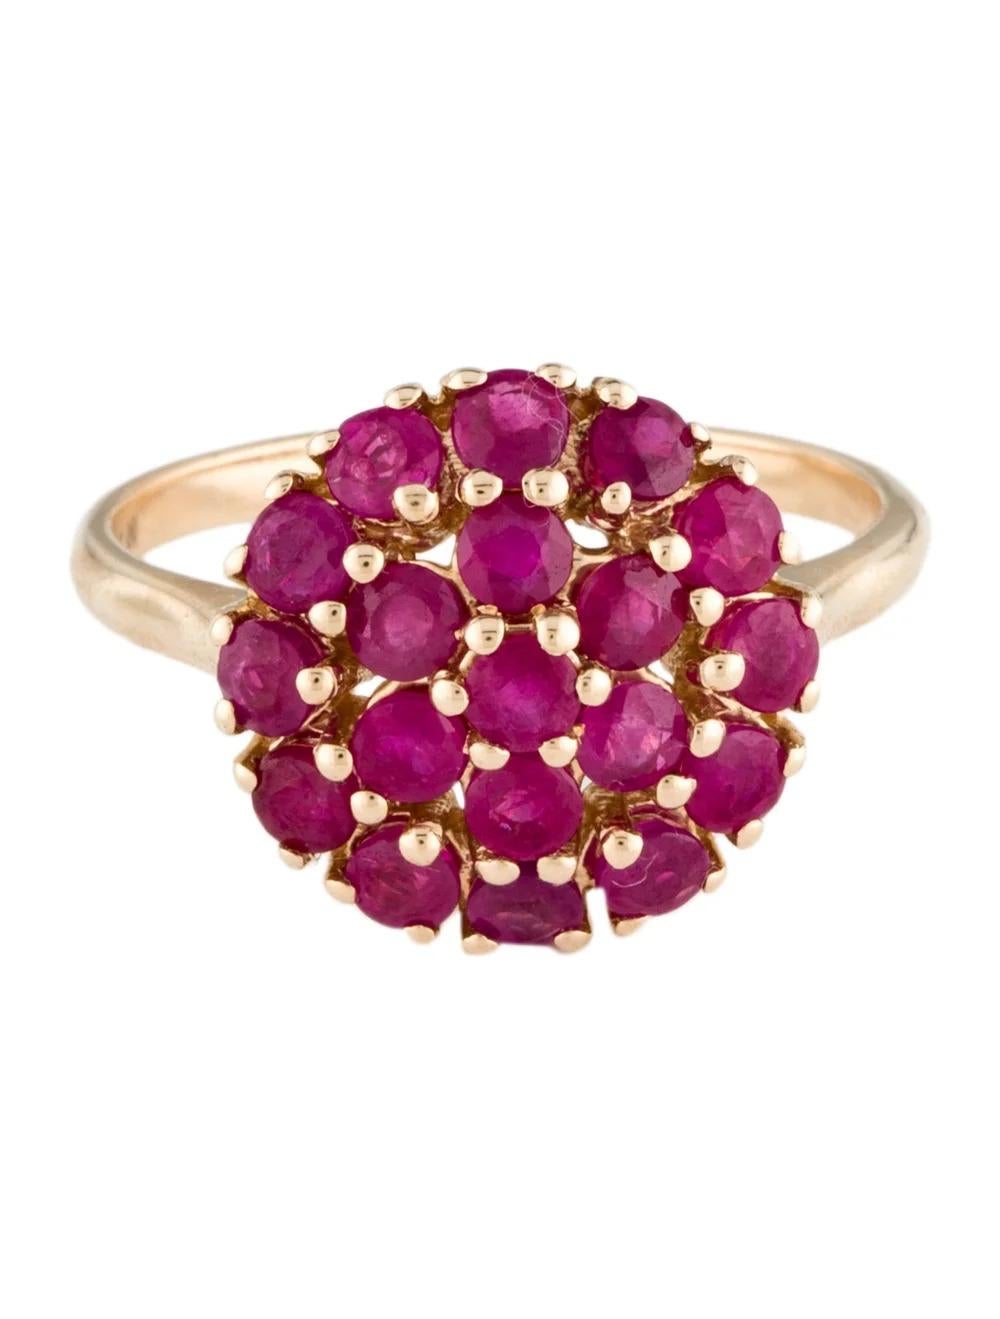 Round Cut 14K Ruby Cocktail Ring, Size 6.75: Elegant Design with Stunning Gemstone For Sale